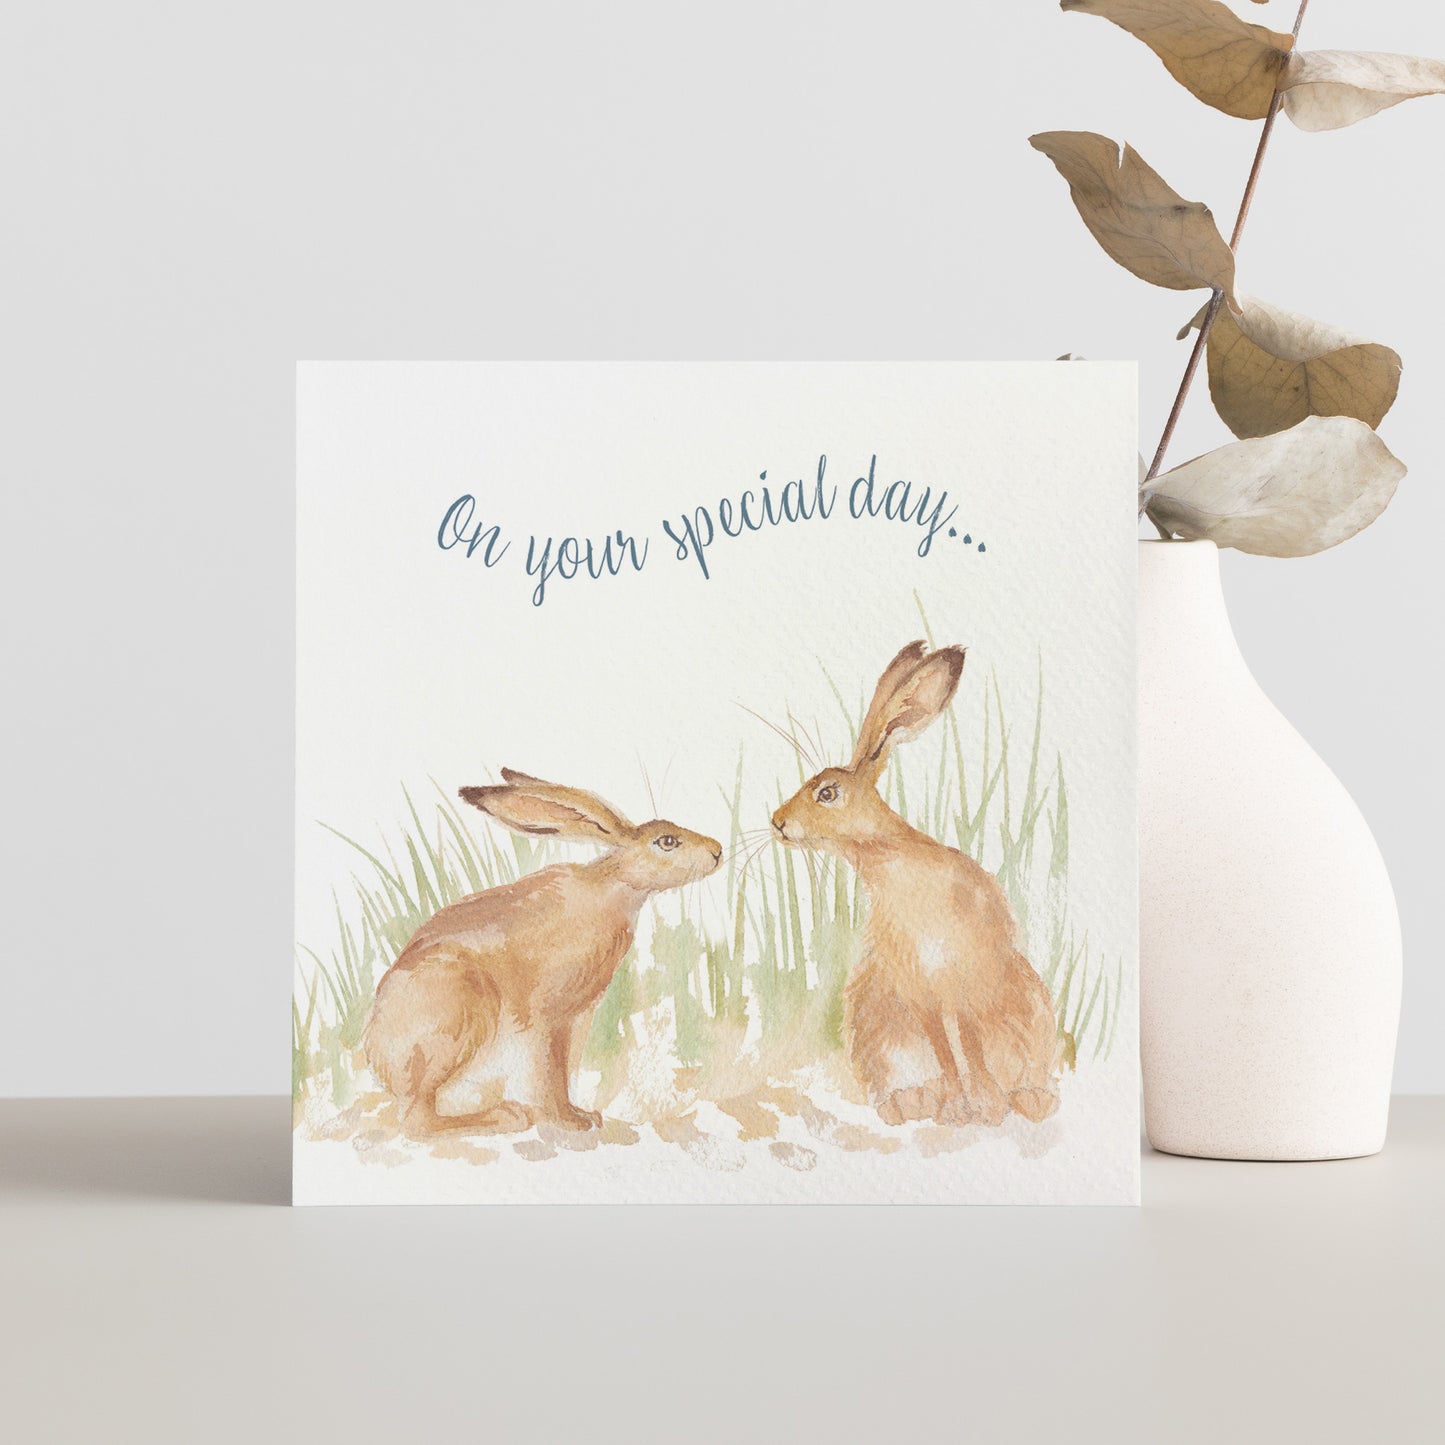 A greetings card reading On Your Special Day in dark blue text above a hare couple in a watercolour style.